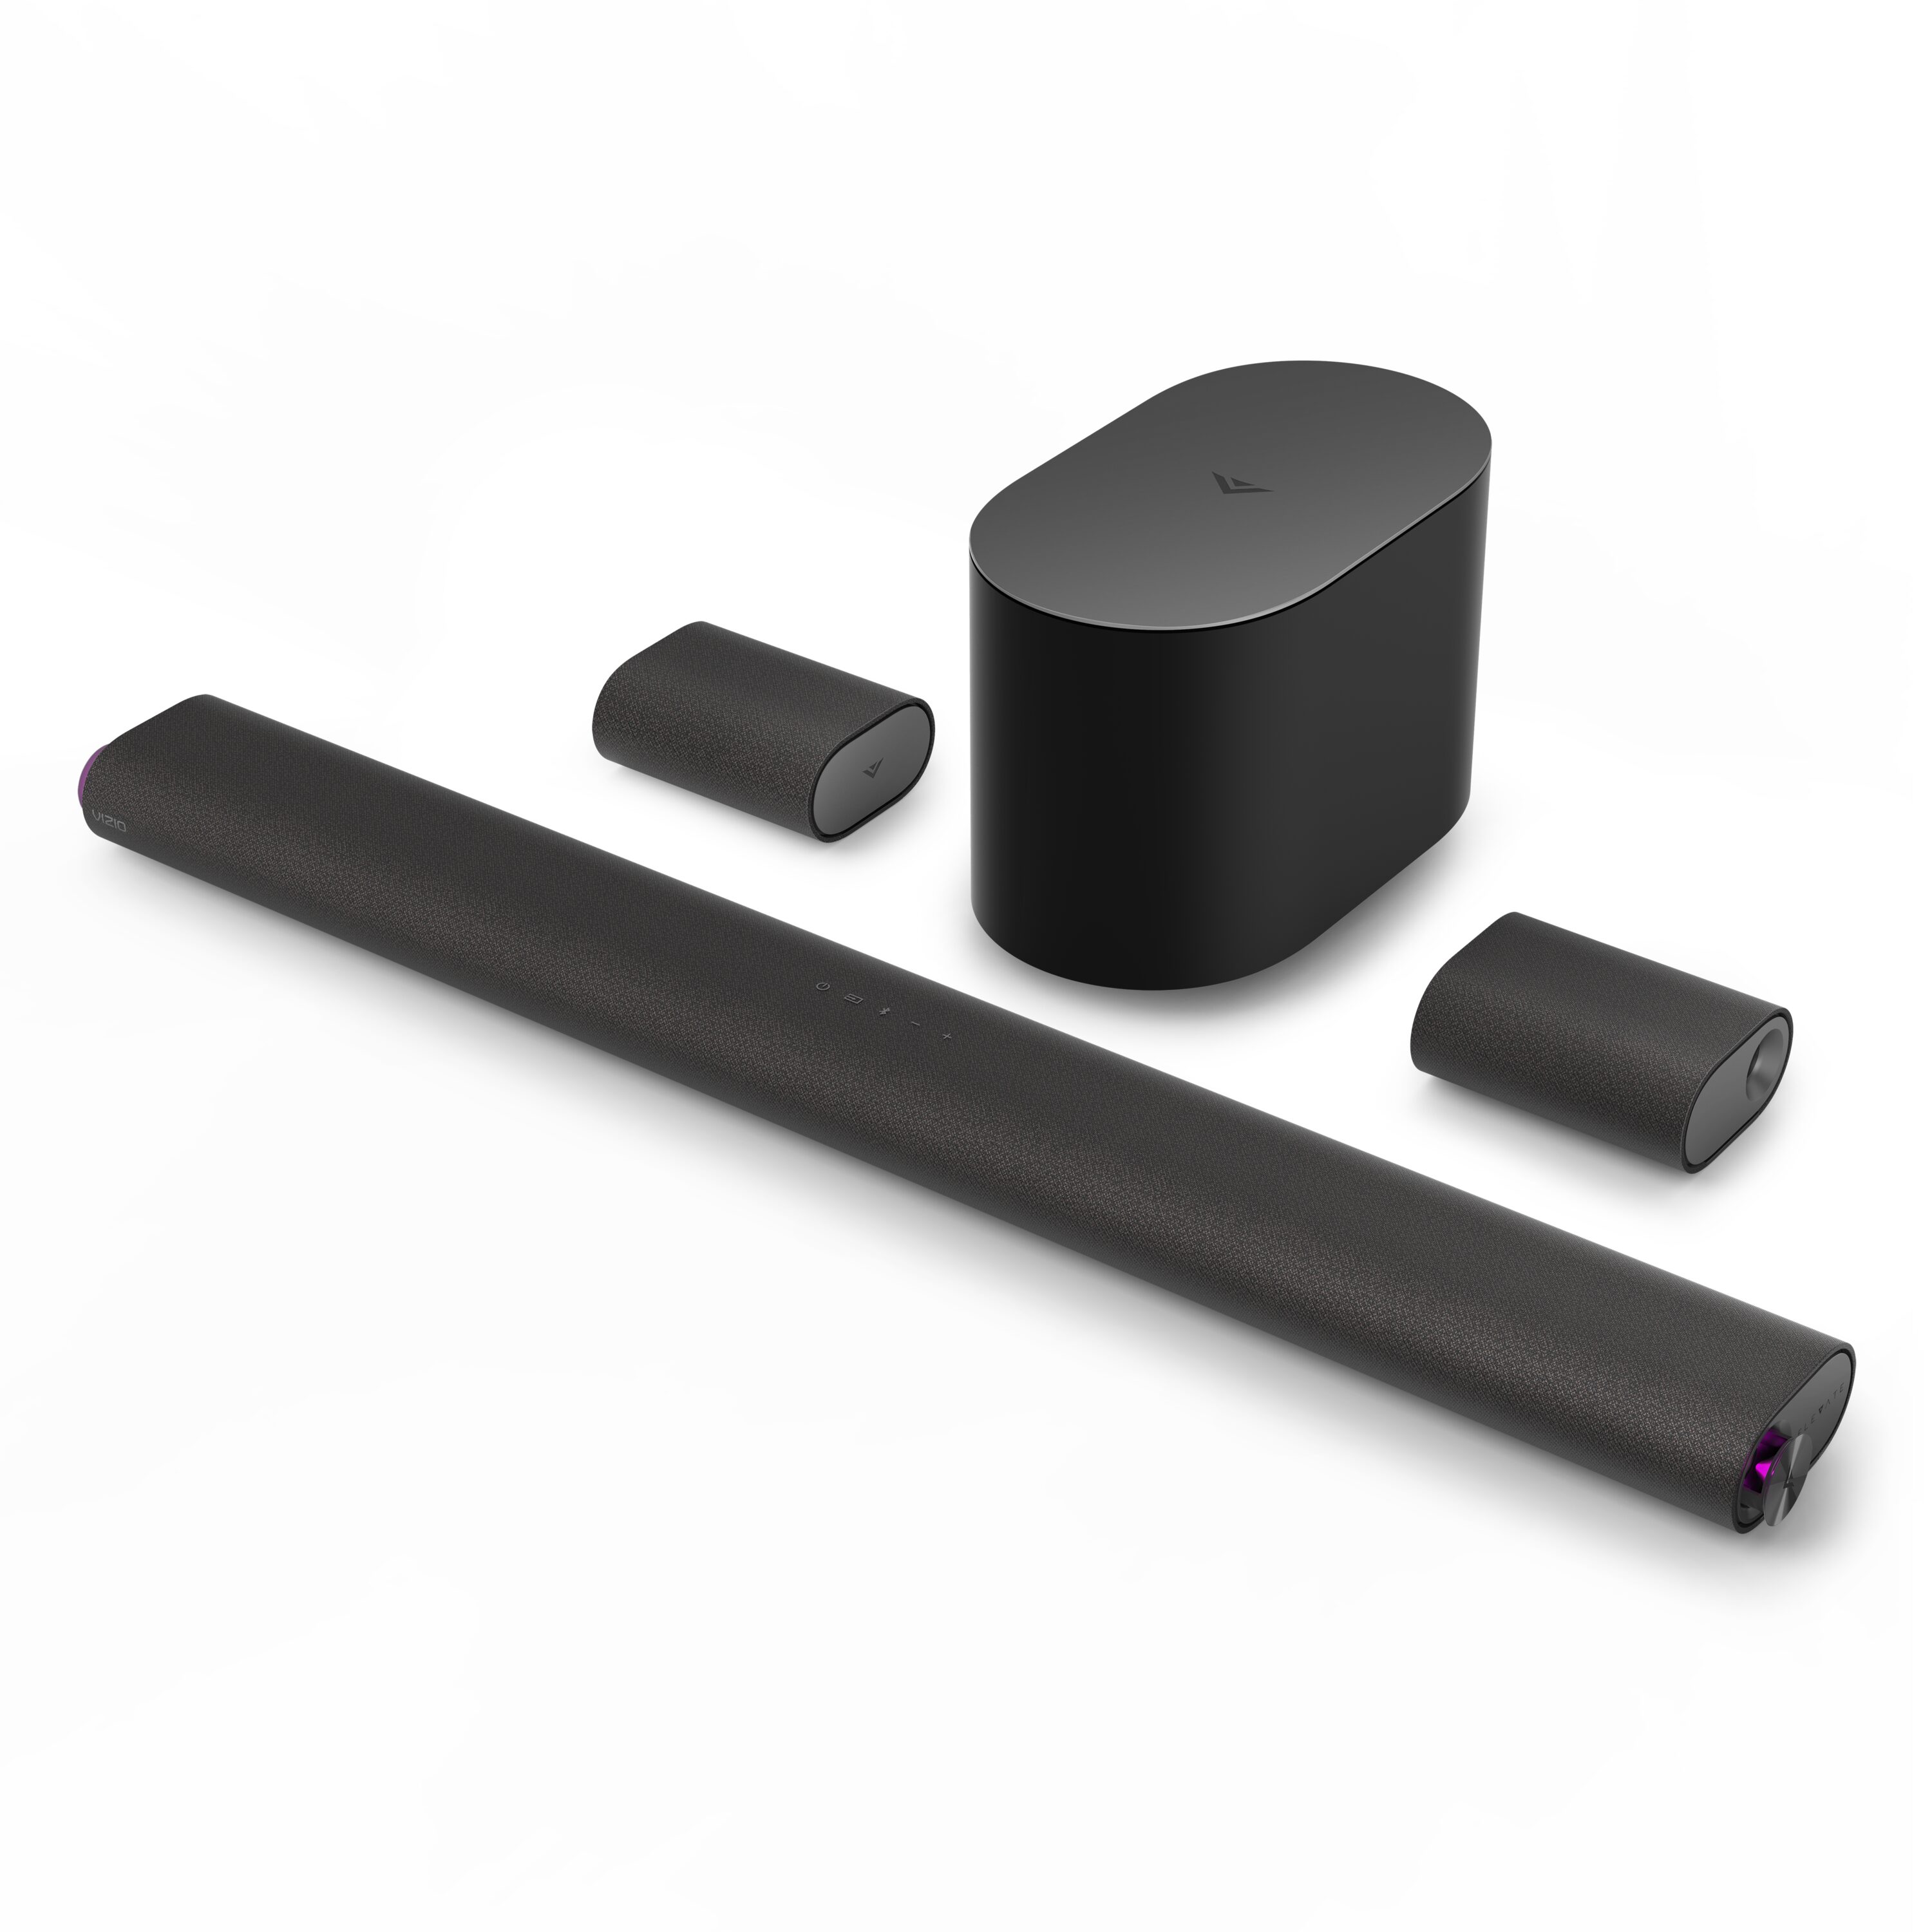 VIZIO M-Series Elevate 5.1.2 Sound Bar with Dolby Atmos and Wireless Subwoofer - M512e-K6 - image 1 of 25